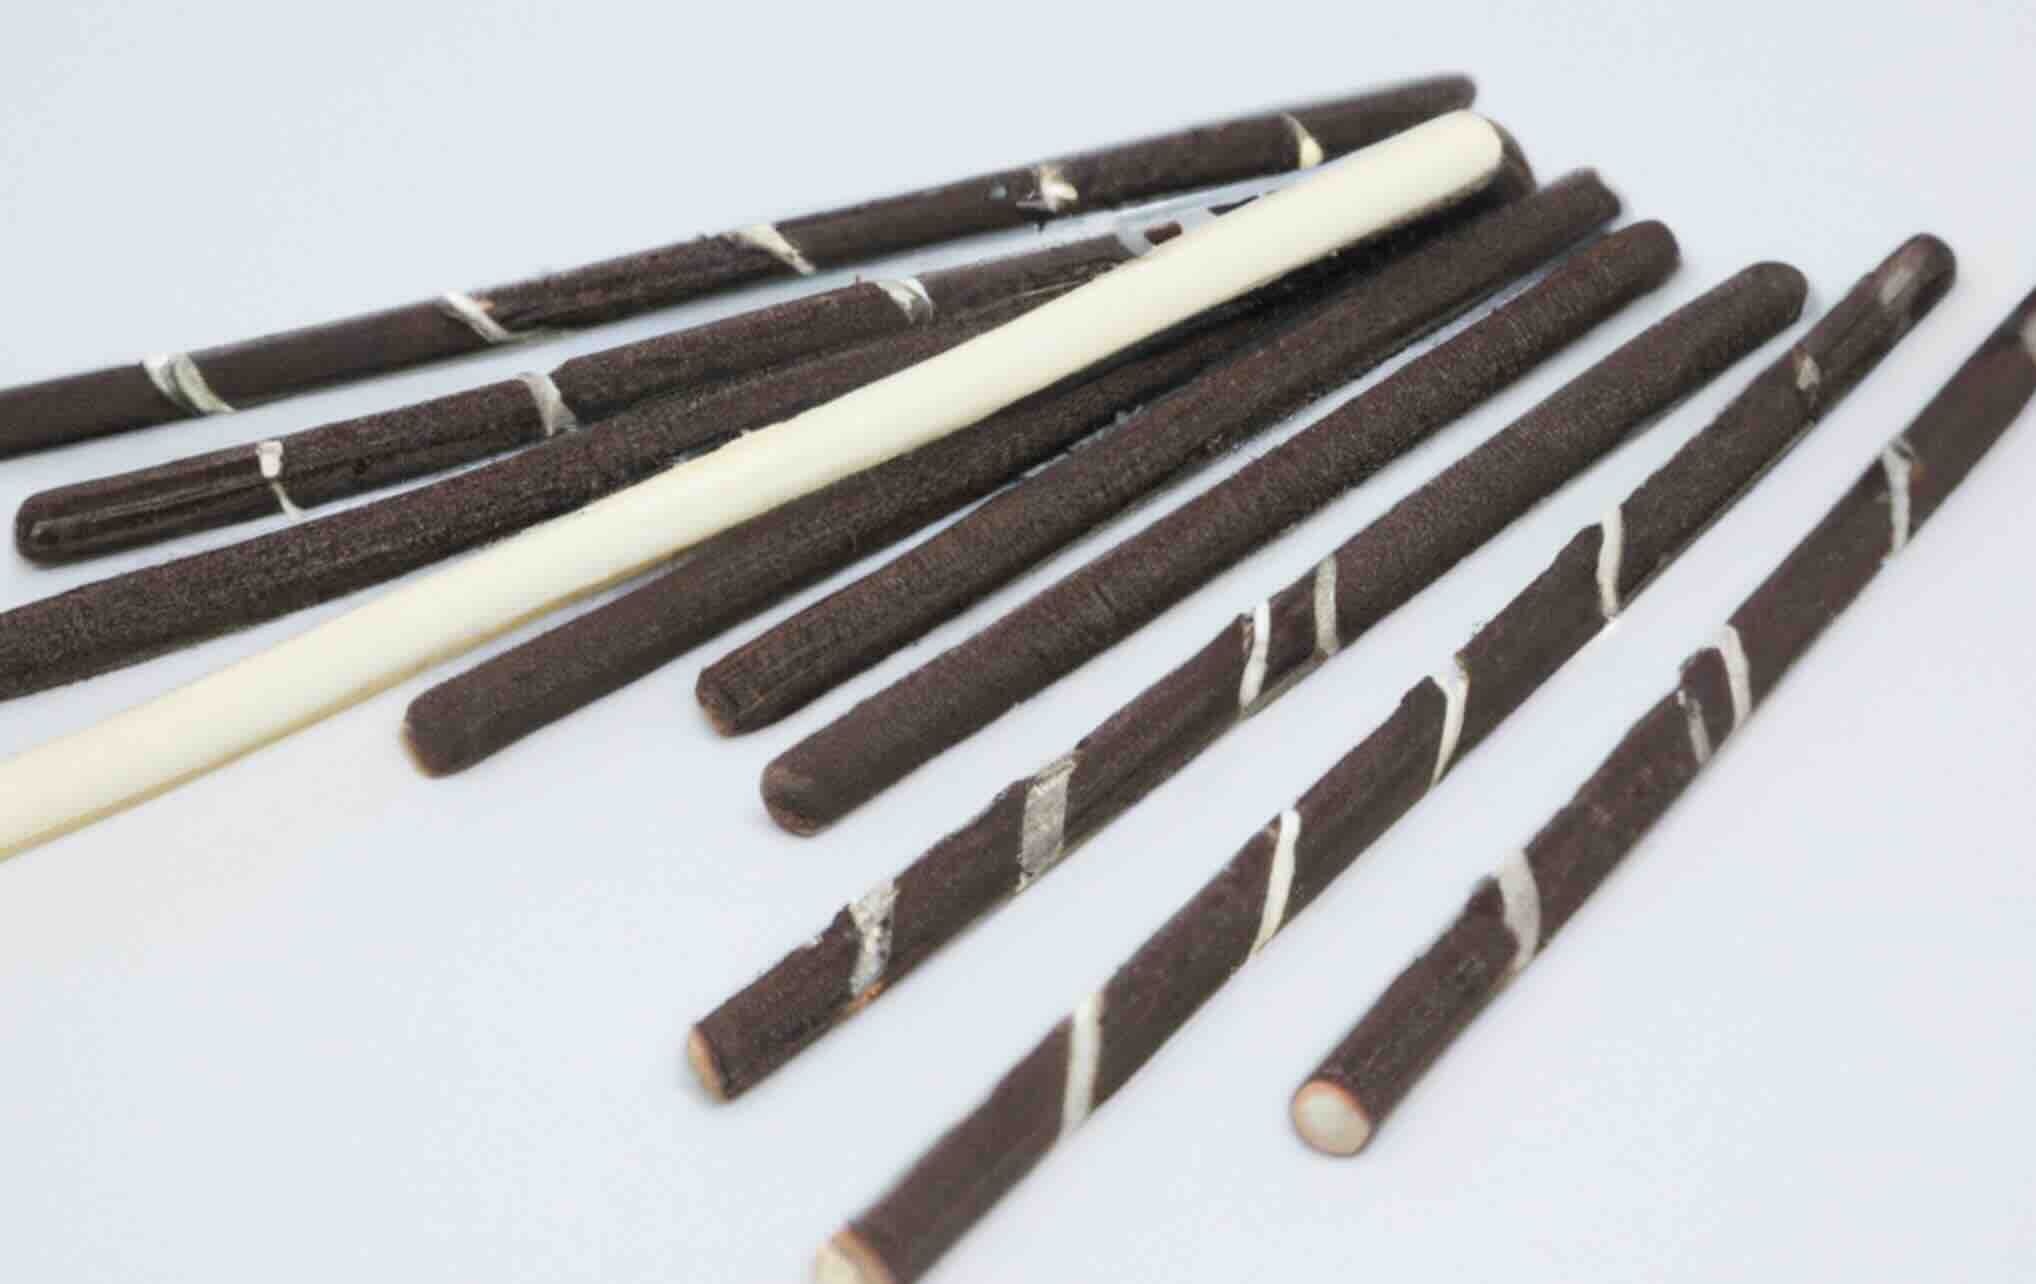 Cookies and Cream Pocky